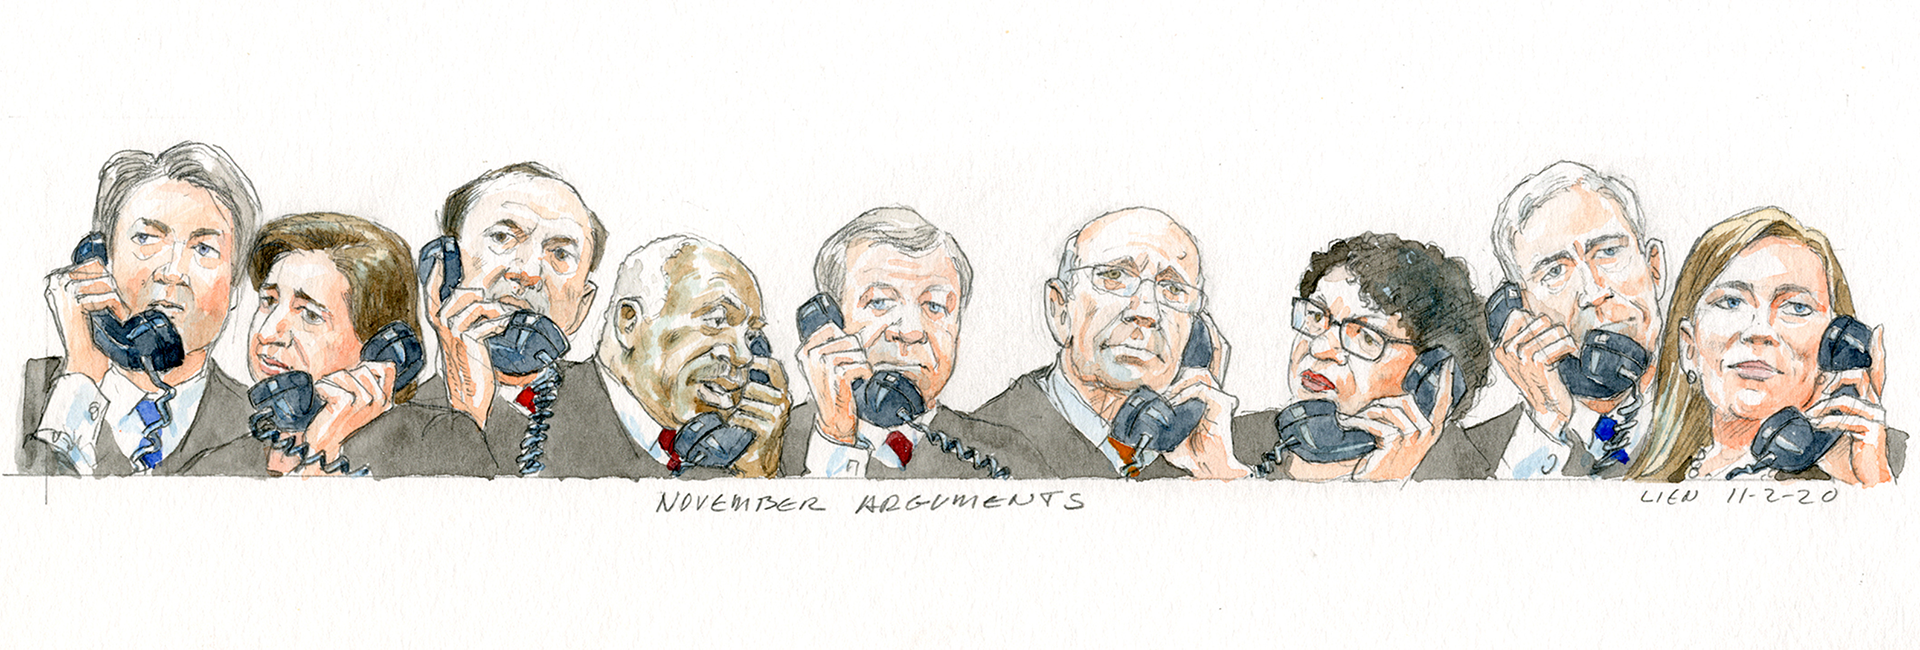 Drawing of the Supreme Court justices holding telephones labeled November Arguments